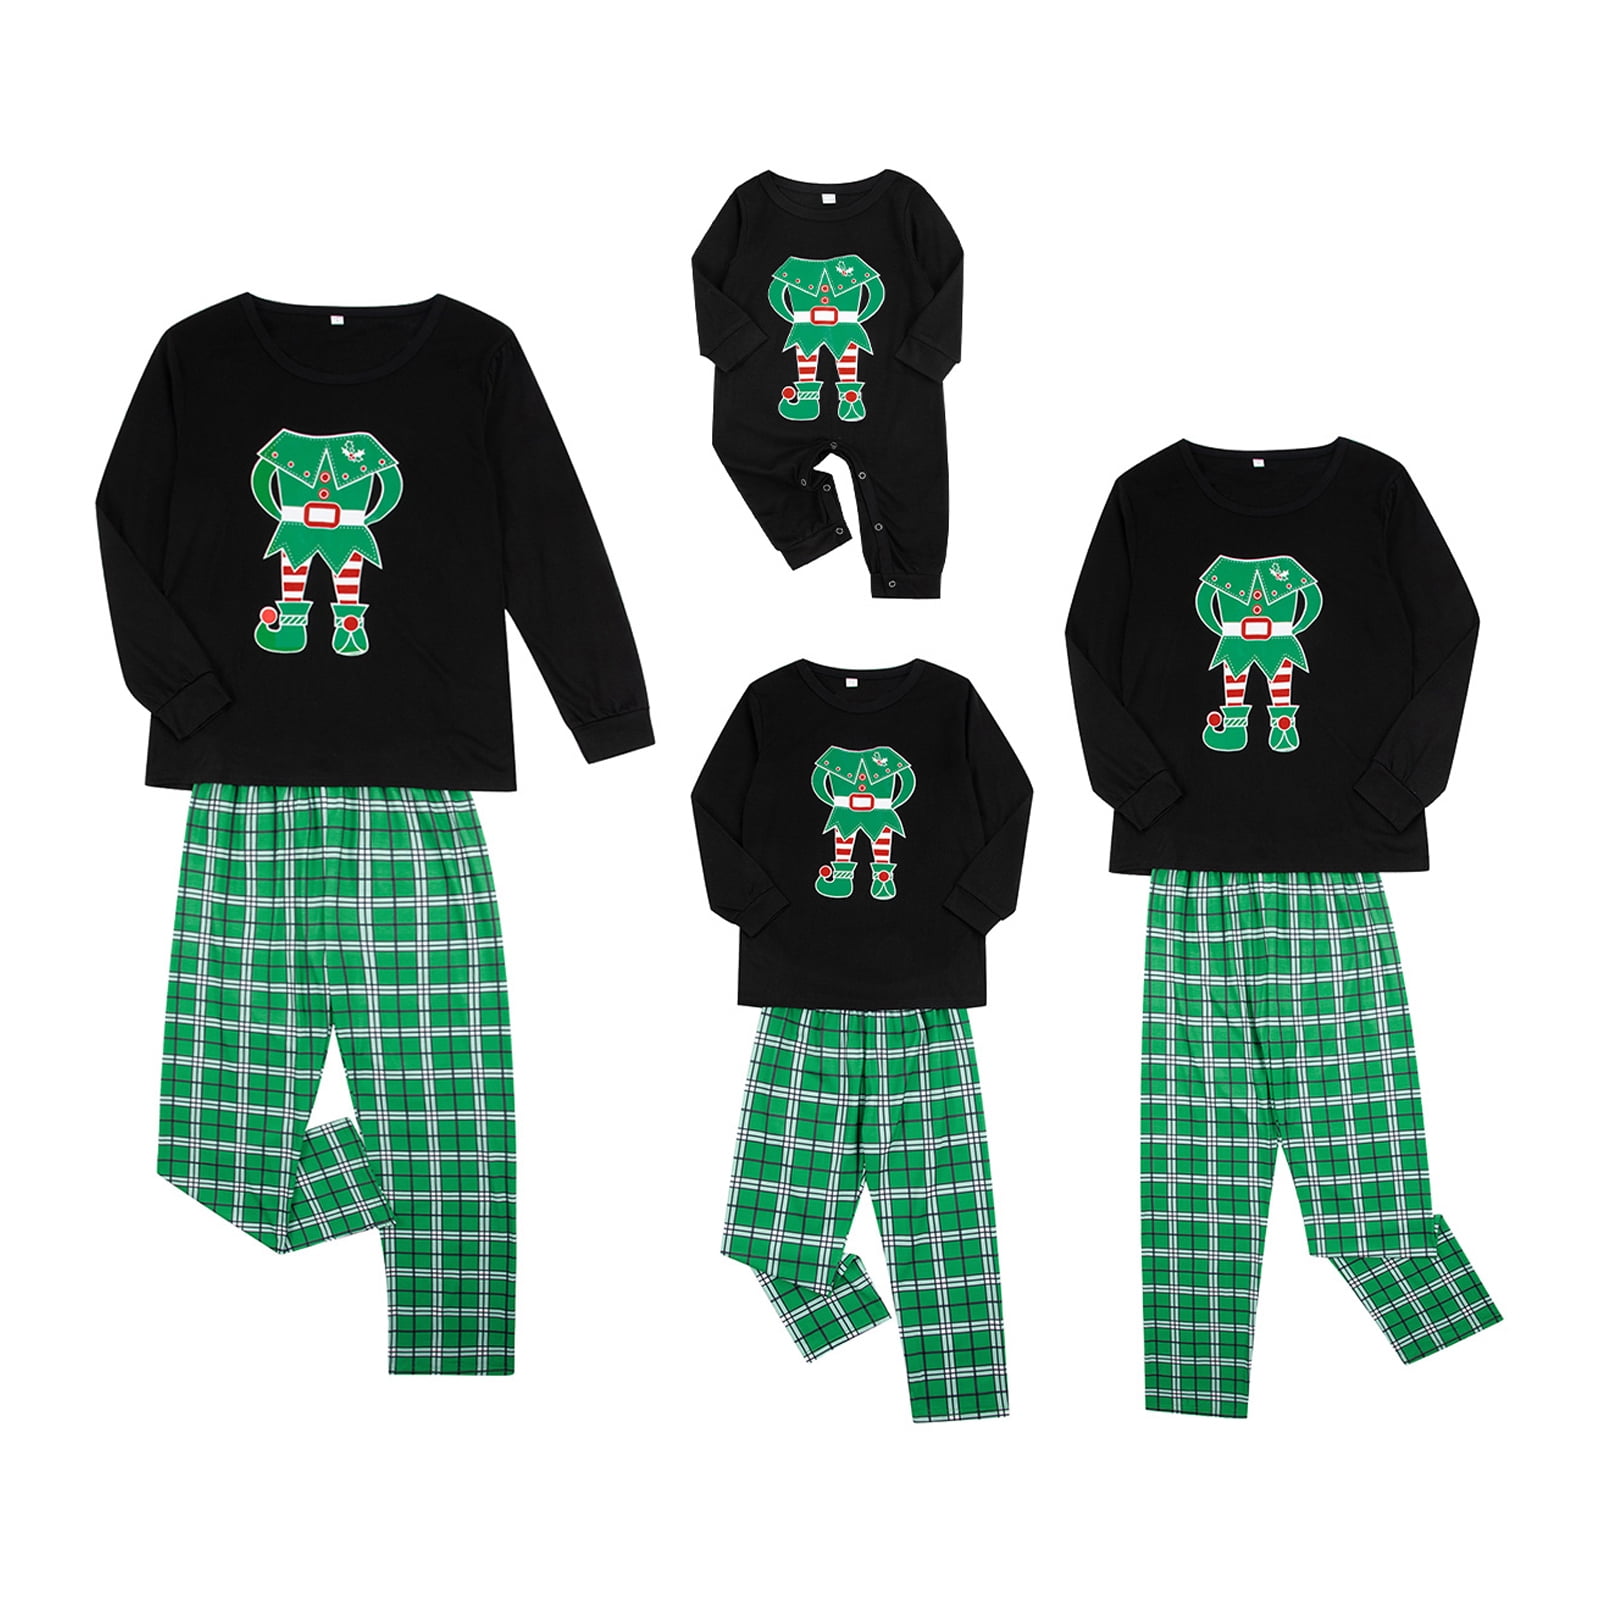 Maayn 2020 Family Matching Pyjamas Set,Matching Christmas Pyjamas,for Family Women Men Kids Baby Red Plaid Santa Claus with a mask and Paper towel print Loungewear 3-6Months, Baby